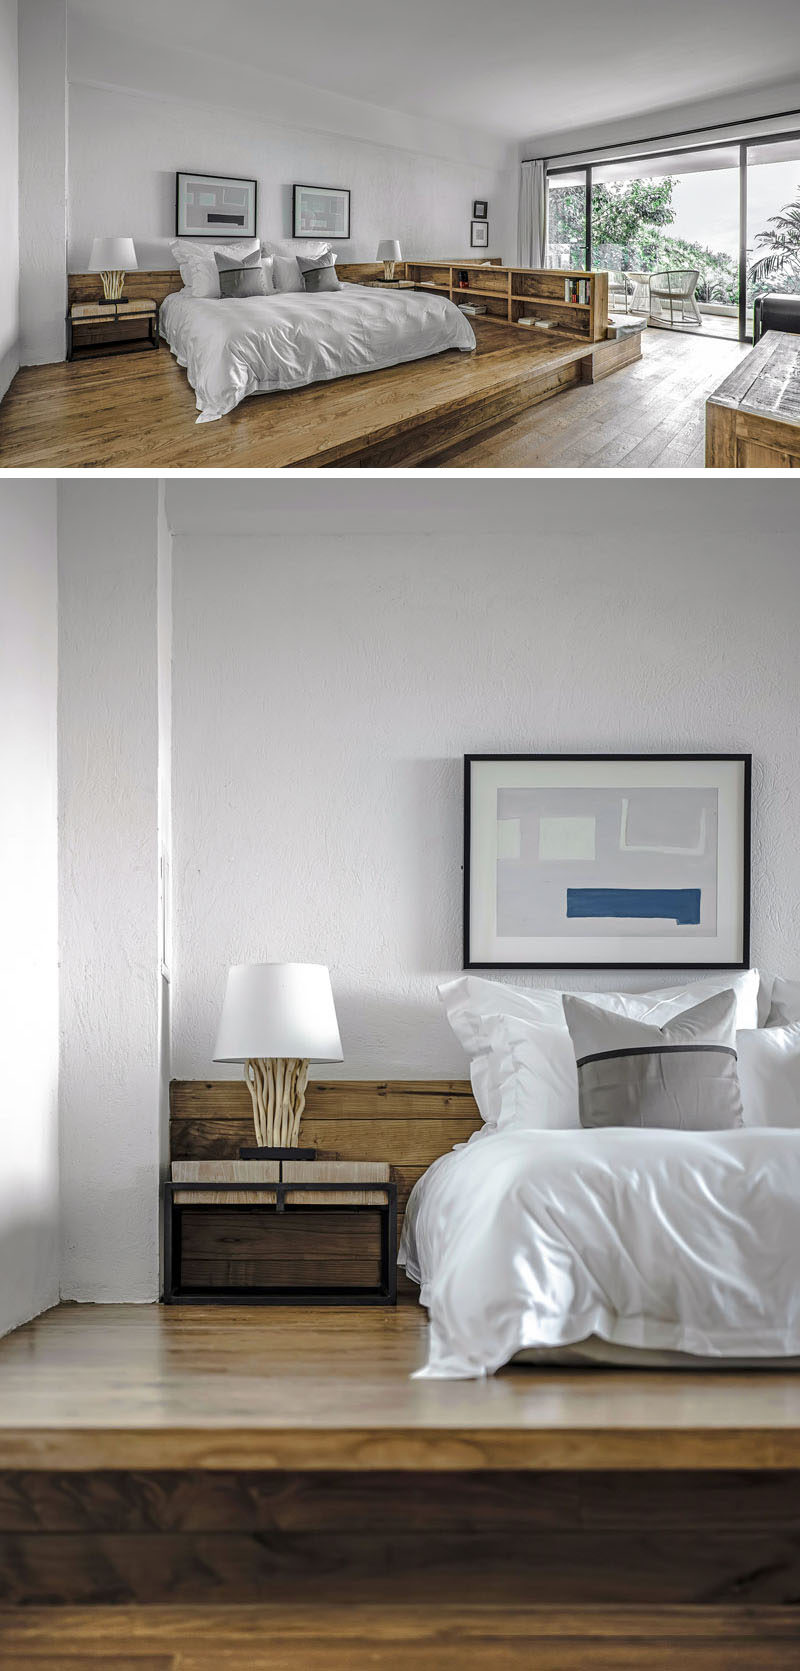 In this modern hotel room, the bed is raised up from the floor on a wood platform. #RaisedBed #ModernHotelRoom